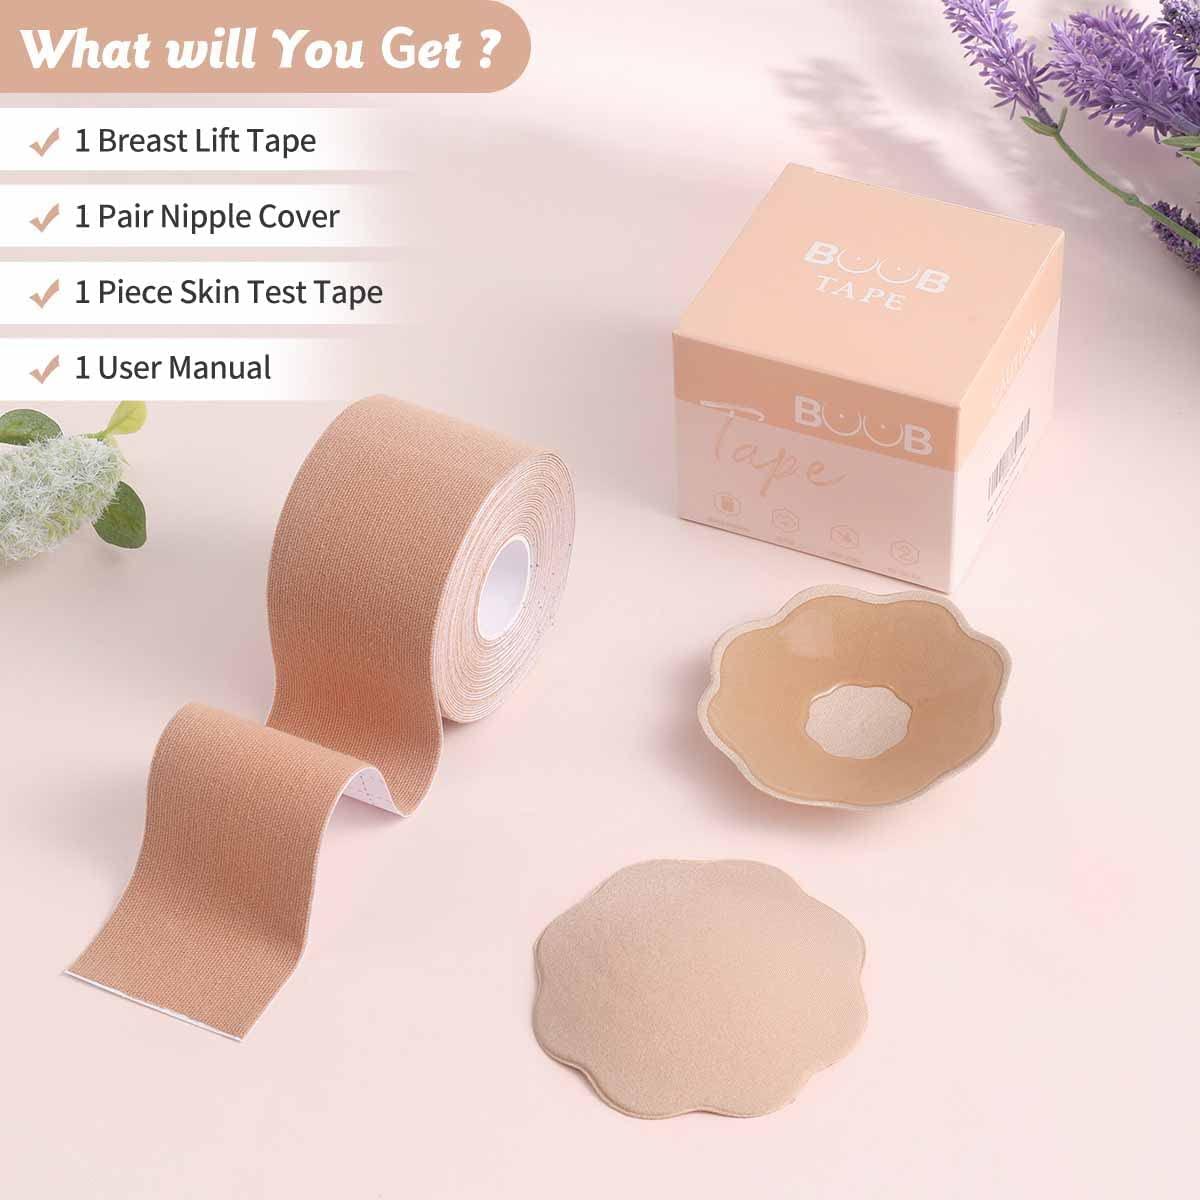 Breast Lift Tape, 2 Pcs Boob Tape and 10 Pcs Petal Backless Nipple Cover  Set, Bra Alternative Breathable Breast Lift Tape Athletic Tape for A-E Cup Large  Breast Day Night Wear 